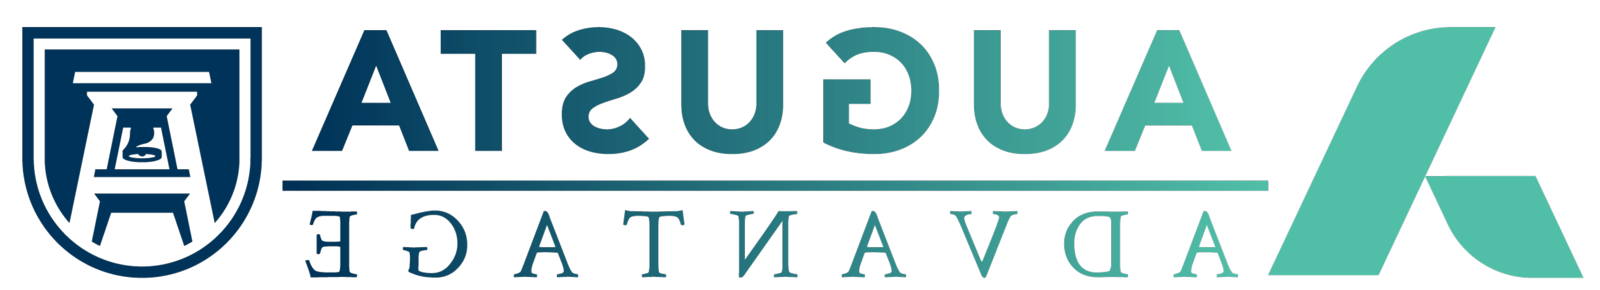 Augusta Advantage logo composed of the Augusta Technical College A icon in mint green on the left with the words Augusta Advantage in the center divided by a horizontal line followed by the Augusta University icon in Navy blue on the right. The whole logo transitions from mint green to Navy blue as you read from left to right.